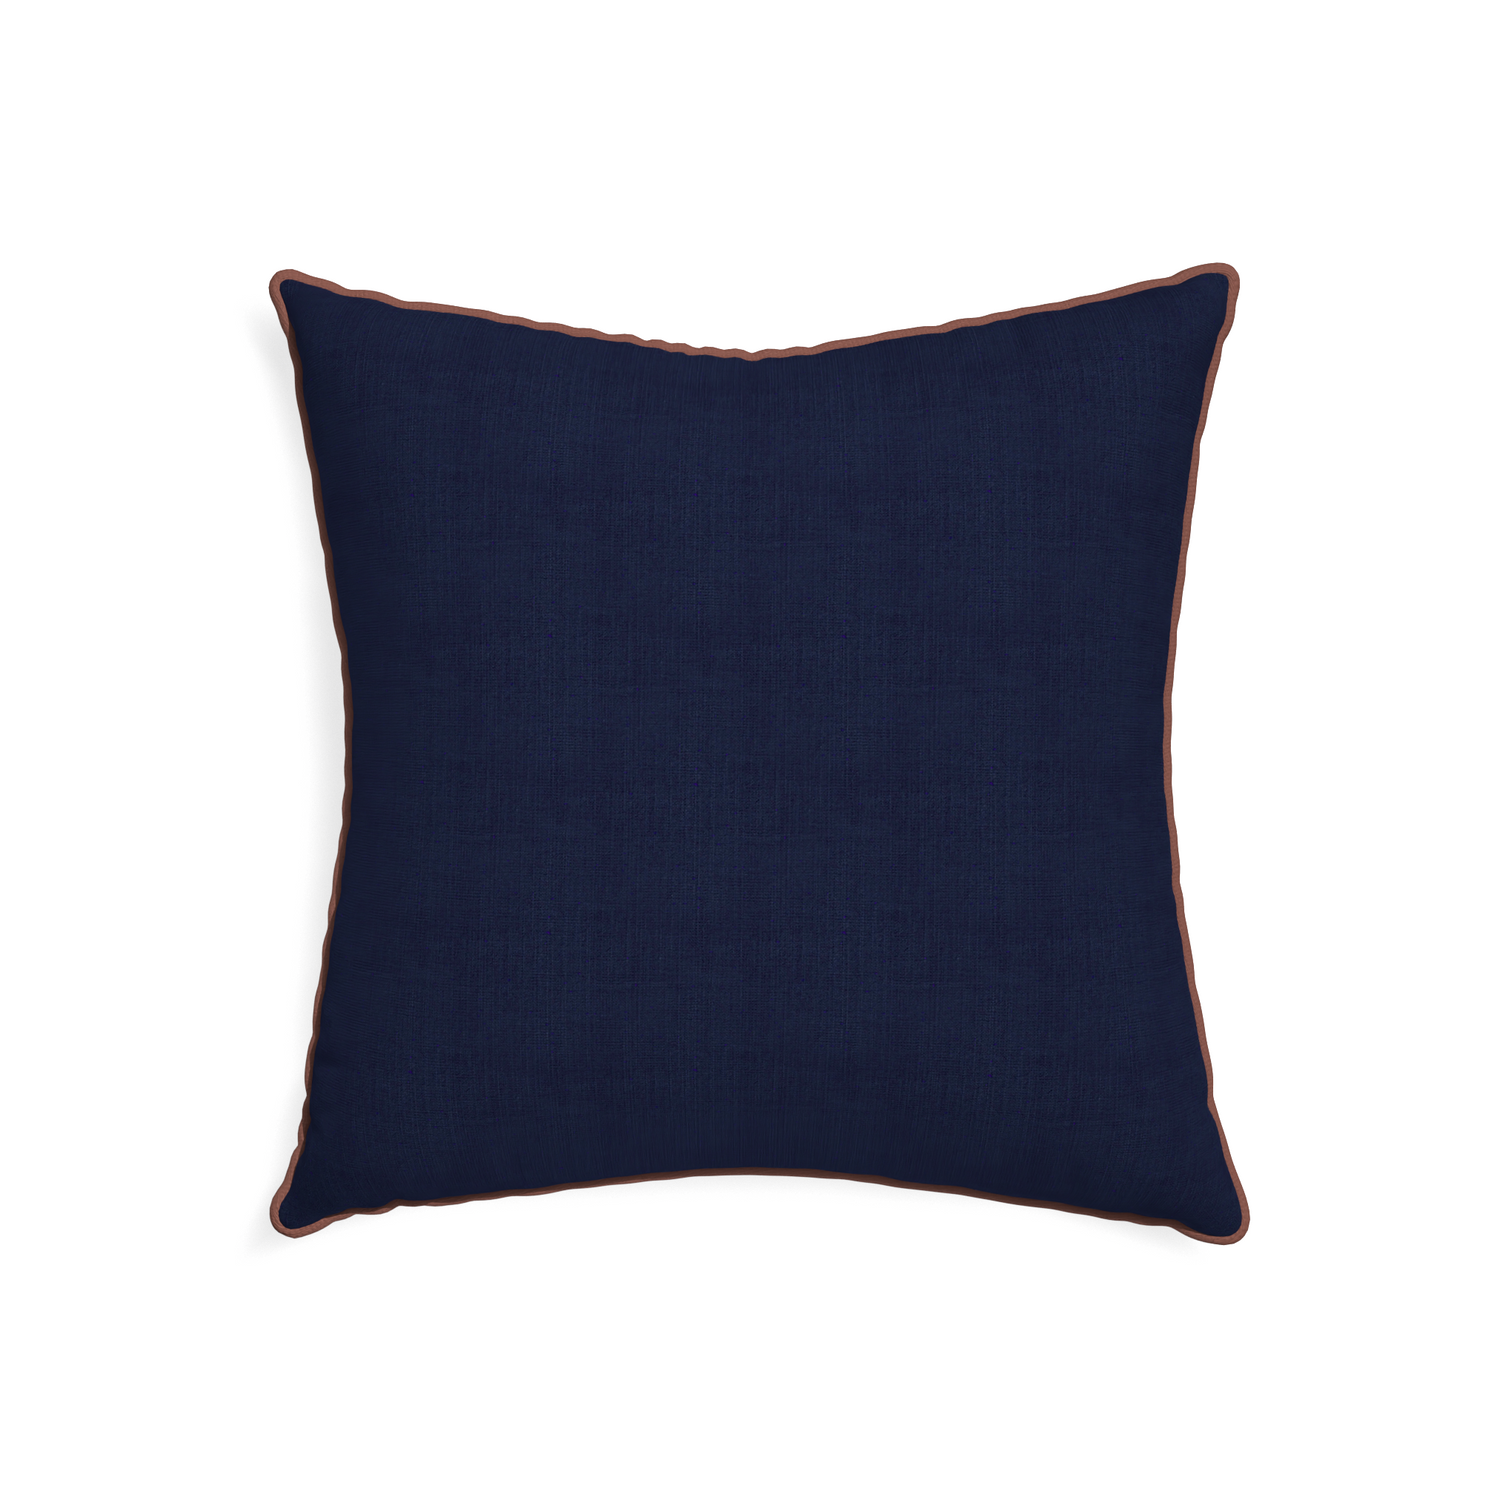 22-square midnight custom navy bluepillow with w piping on white background